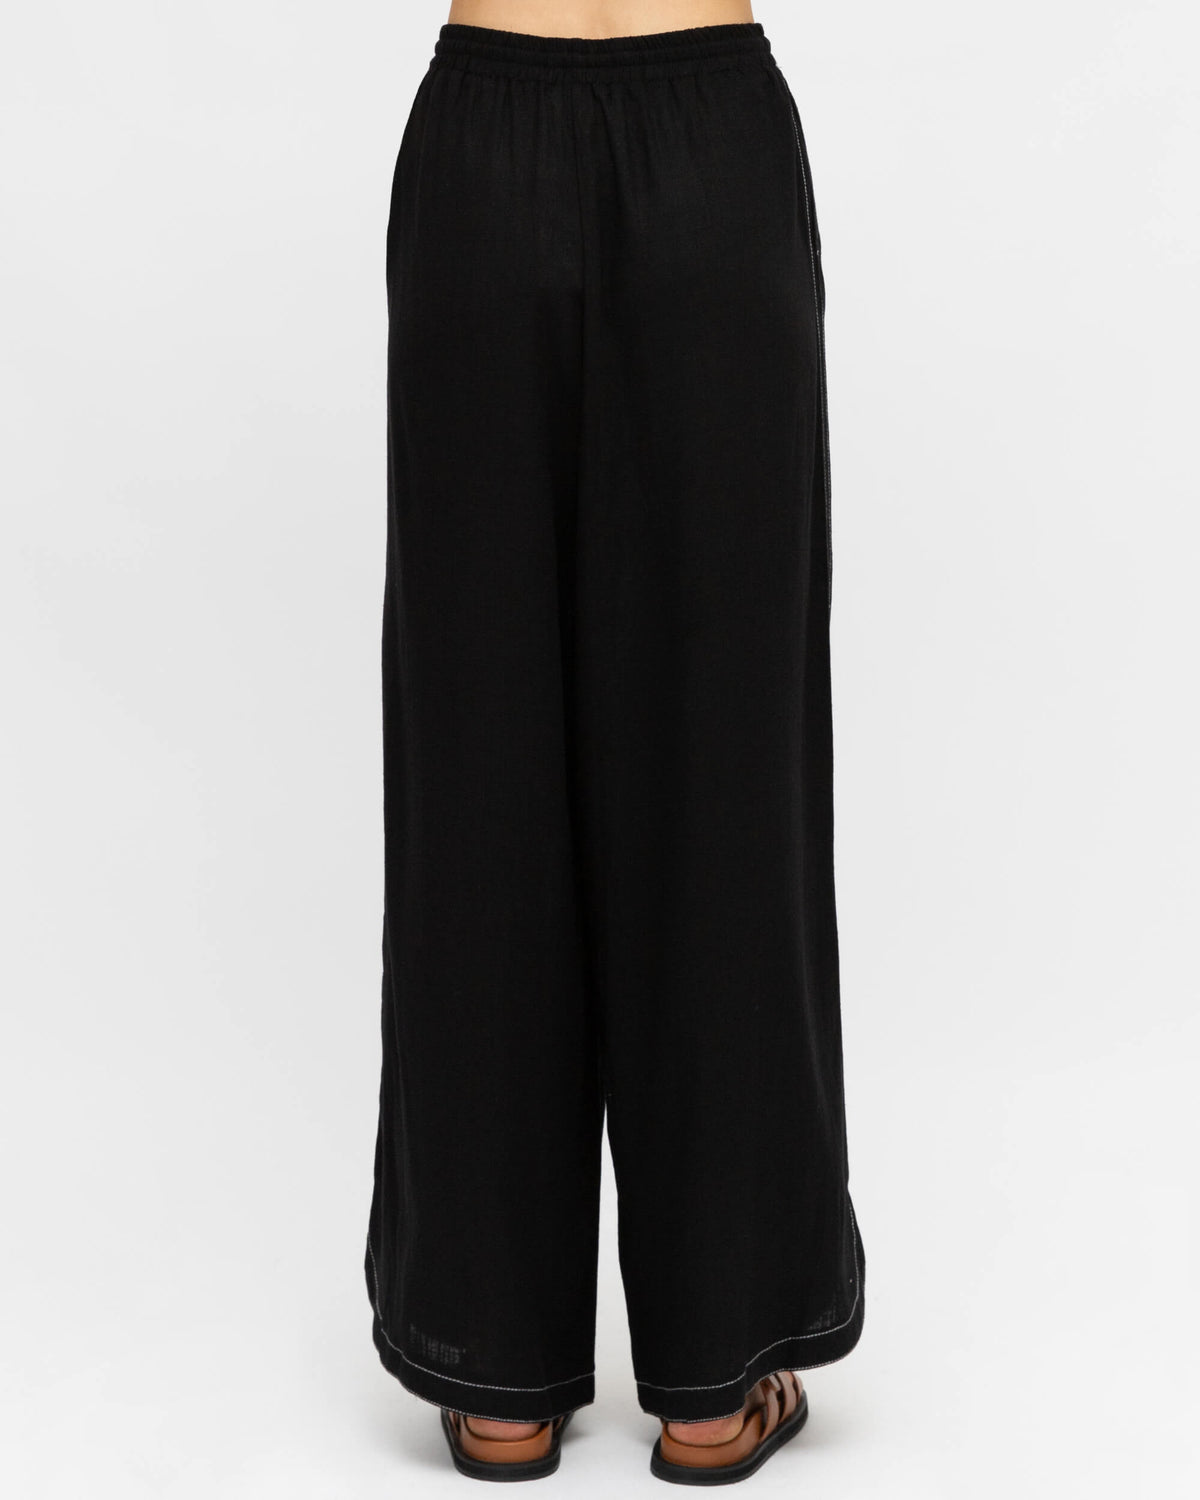 RELAXED CURVED HEM CO-ORD PANTS